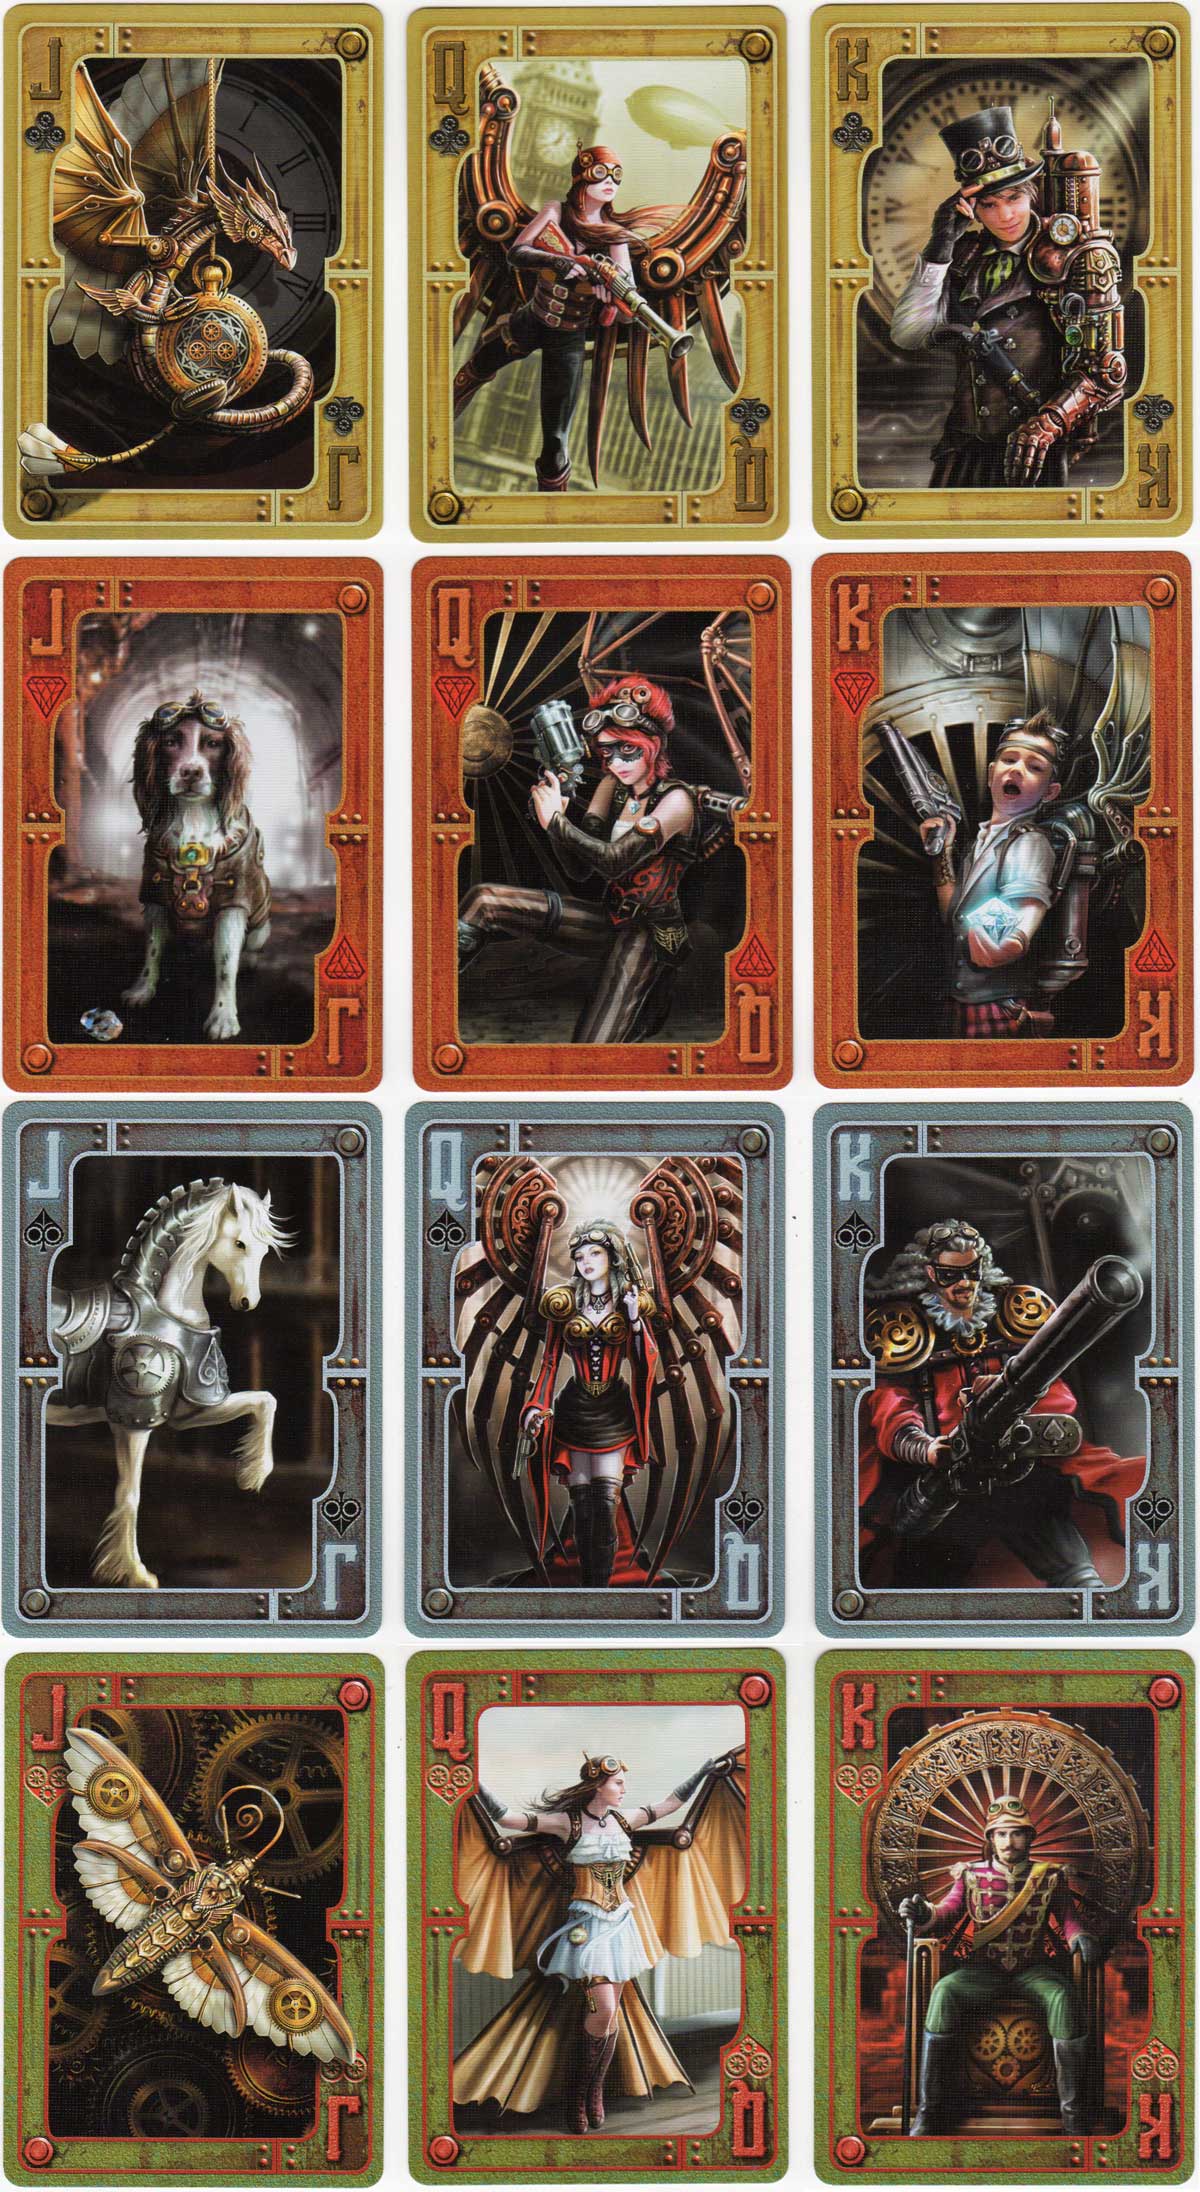 Bicycle Steampunk playing cards with Gothic artwork by Anne Stokes, 2015